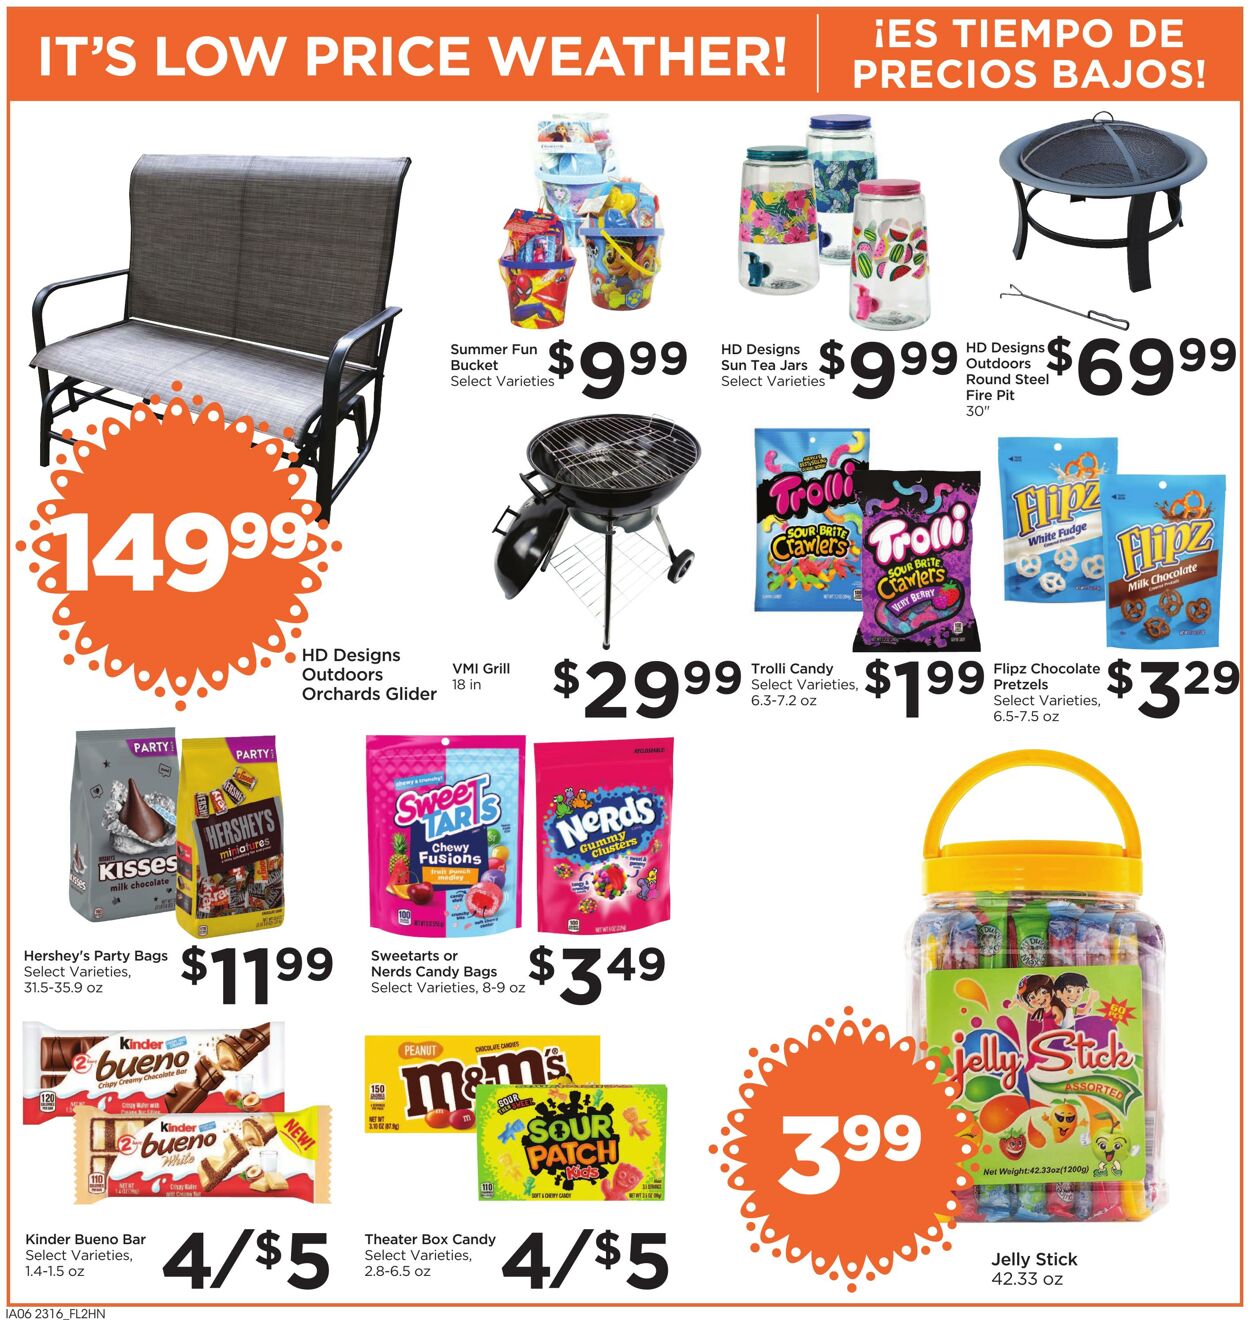 Weekly ad Foods Co 05/17/2023 - 05/23/2023